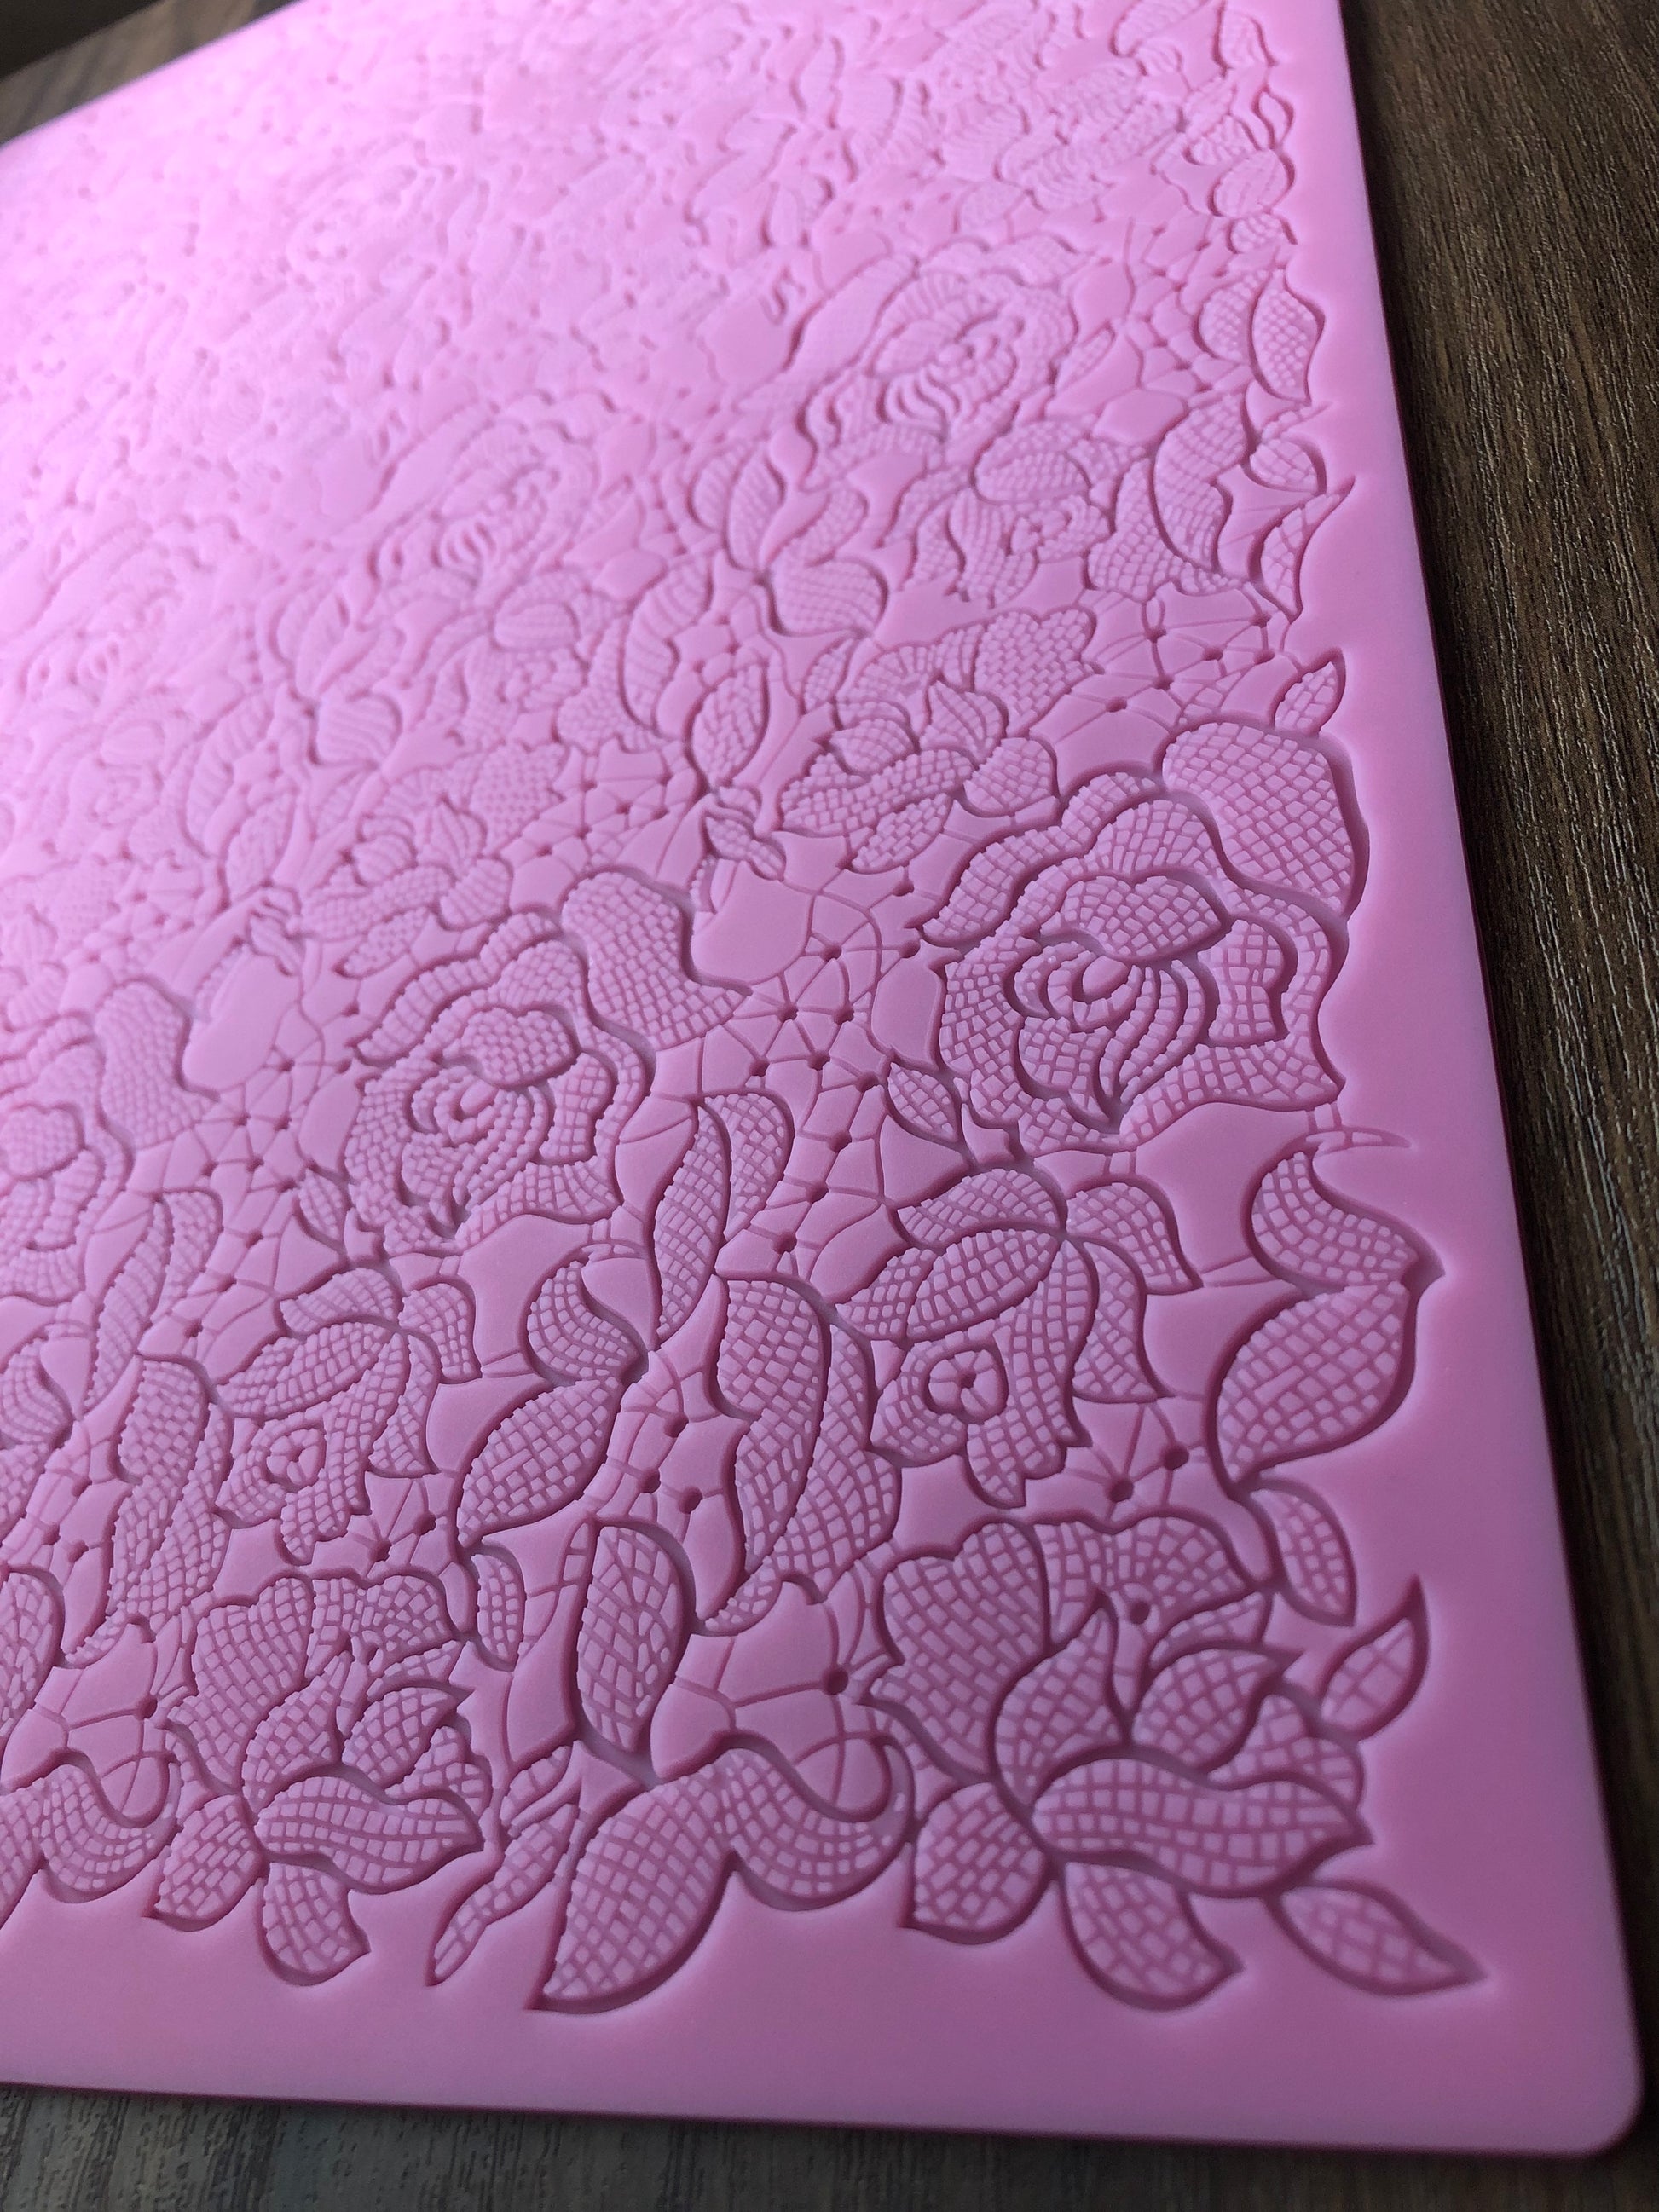 A close up view of a corner of the textured pink floral design mat on a wooden surface.